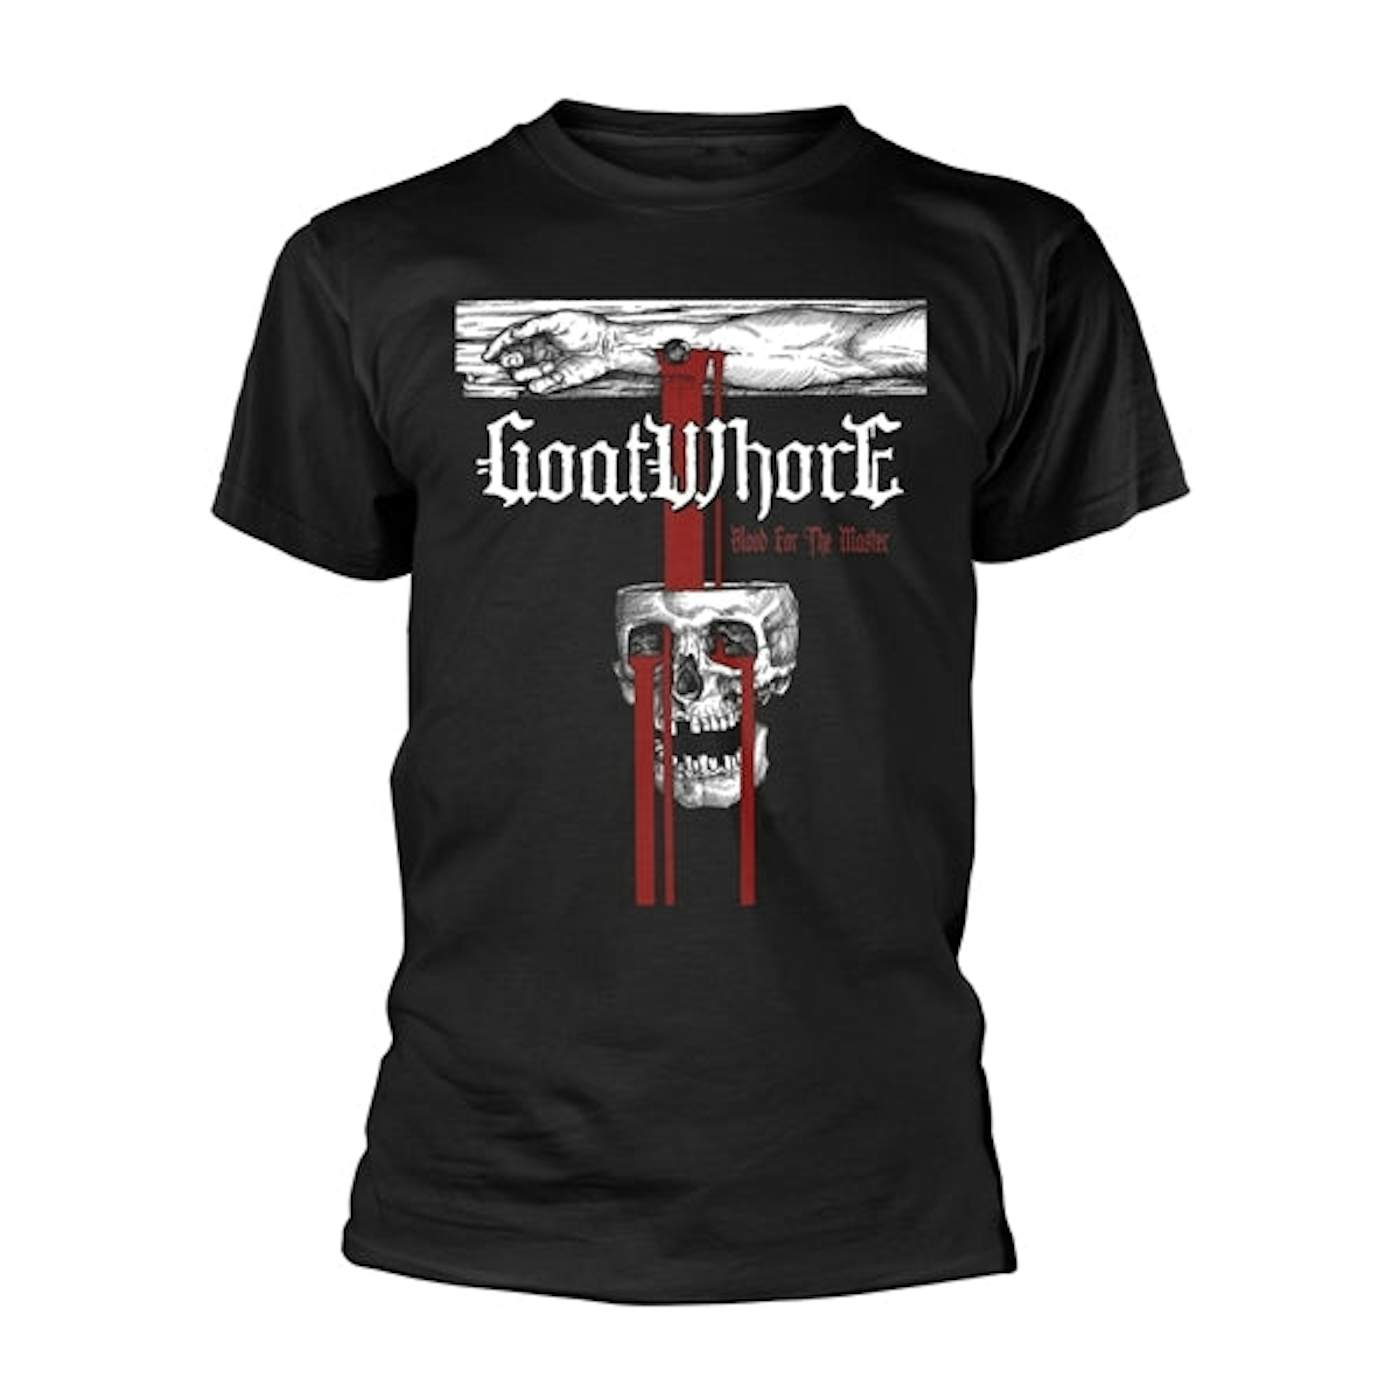 Goatwhore T Shirt - Blood For The Master